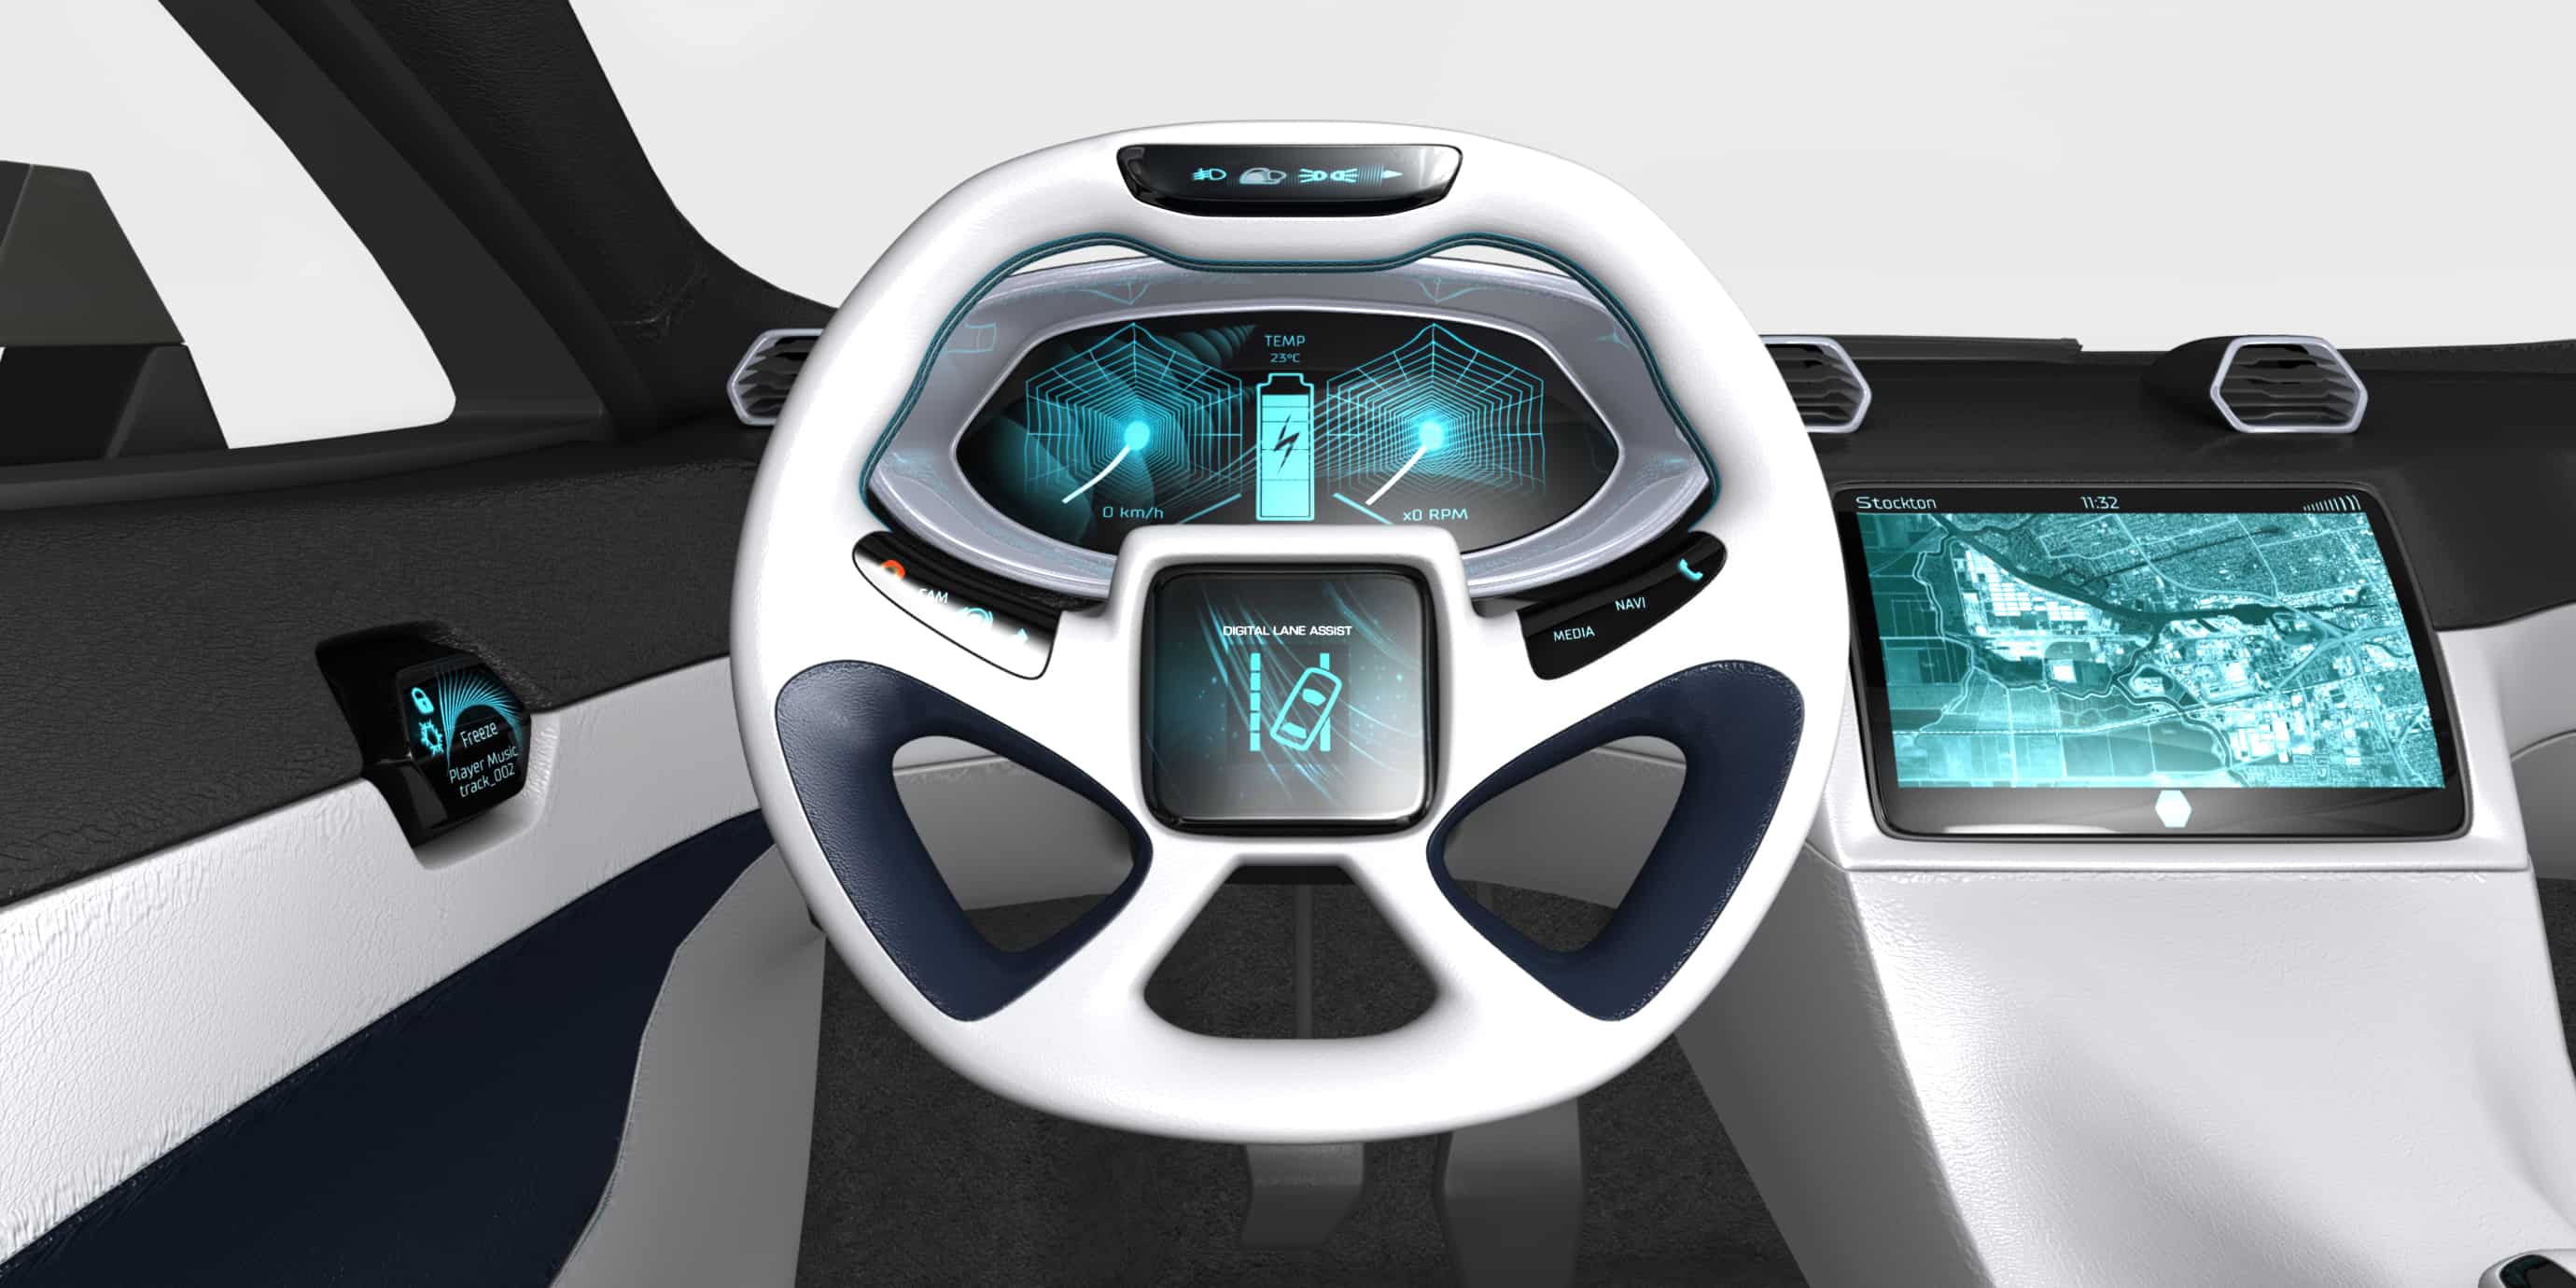 Inside a car, the steering wheel and infotainment dashboard